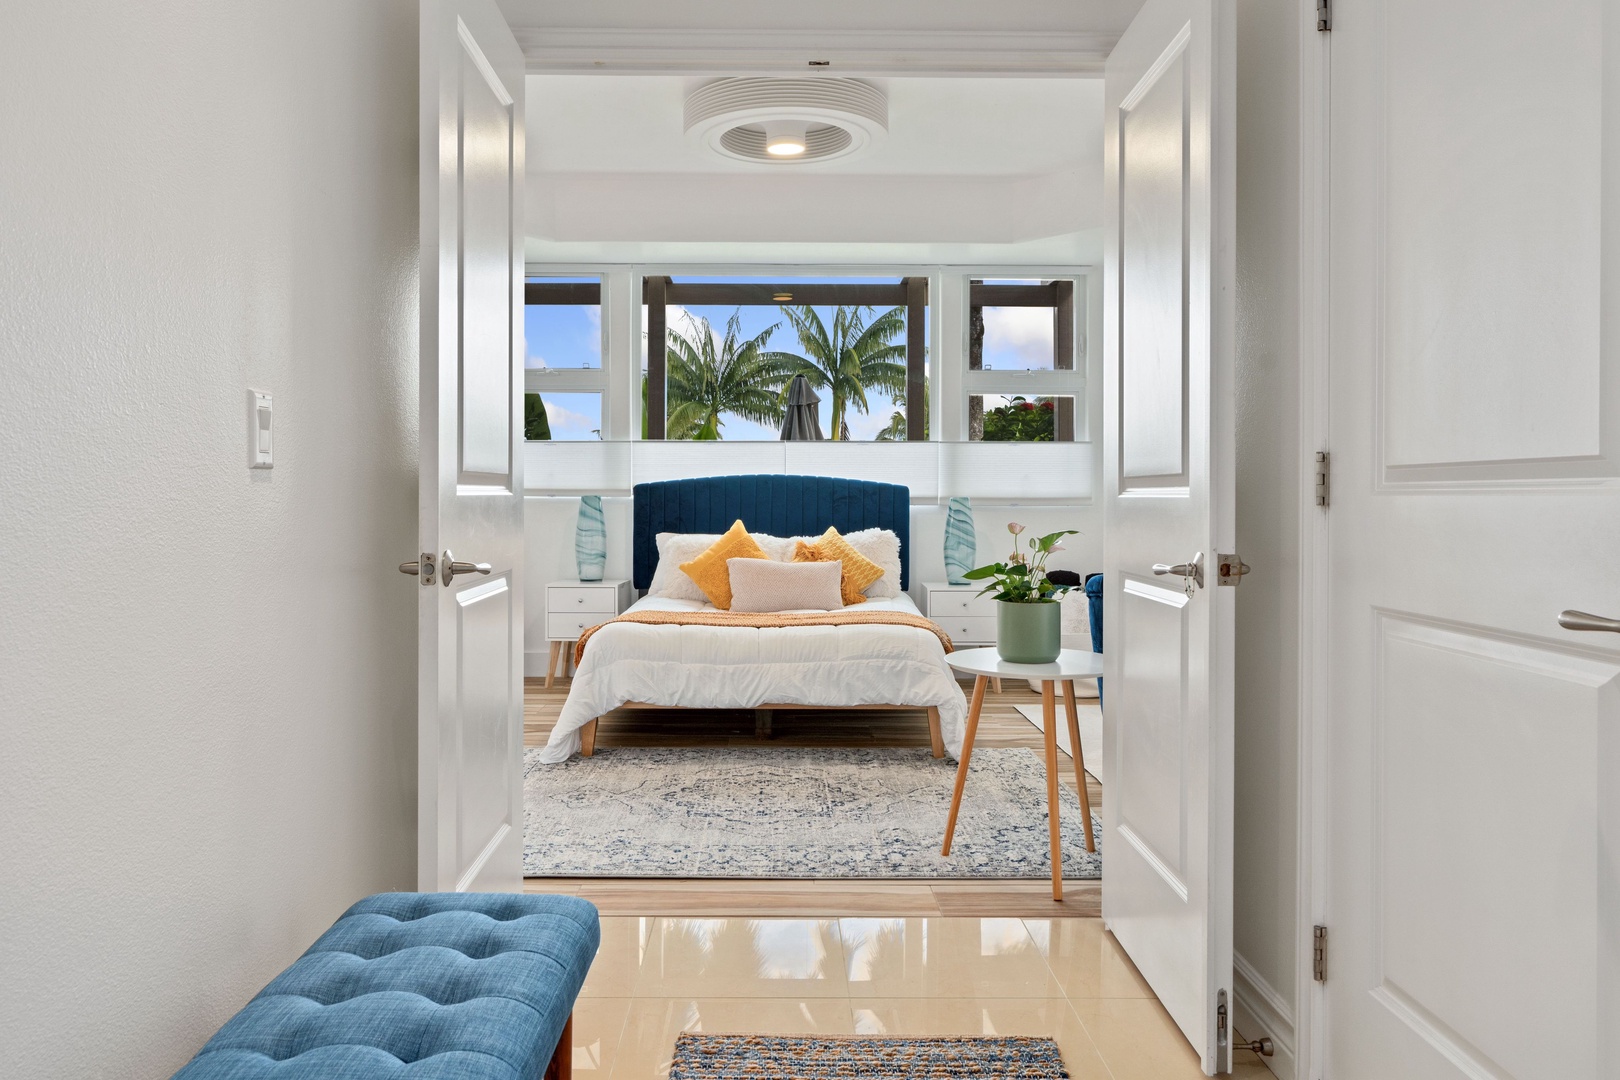 Princeville Vacation Rentals, Tropical Elegance - Step into the serene Primary Suite with gleaming hardwood floors leading towards a cozy bed, framed by a stylish blue headboard.